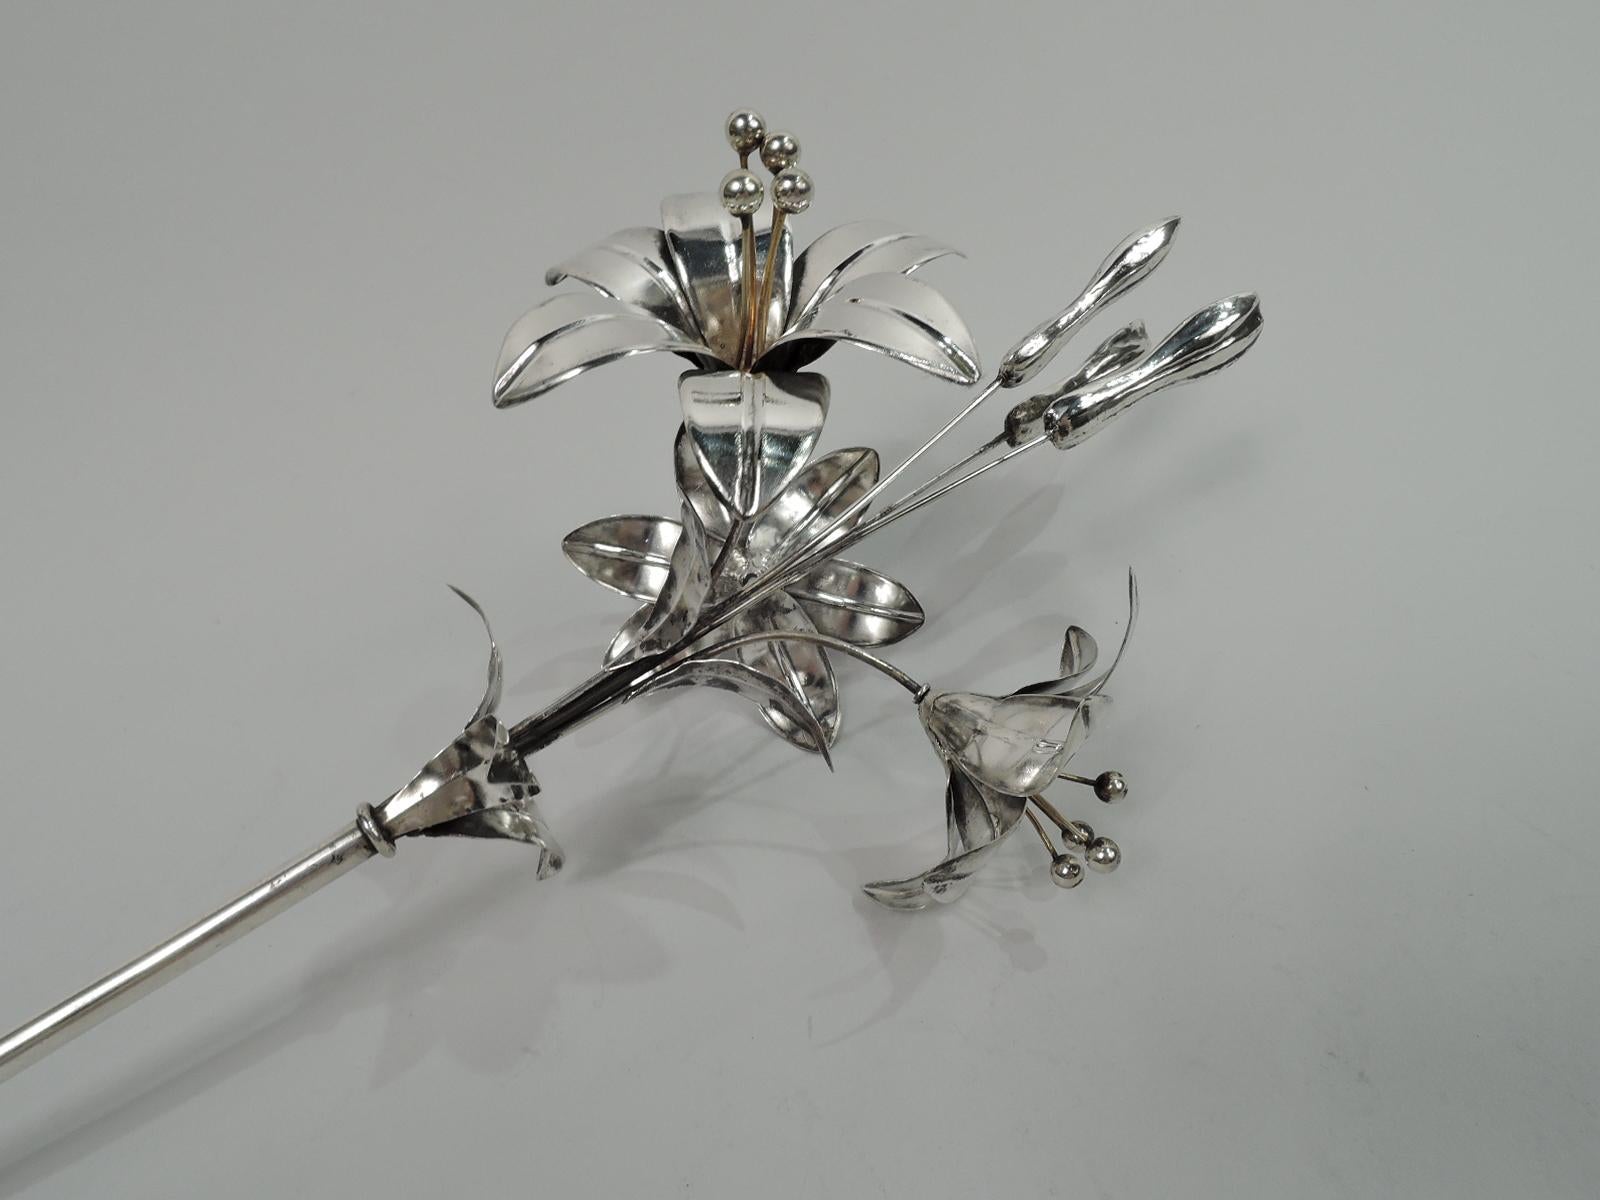 European silver ornament, ca 1920. Single plain hollow stem sprouting 3 flowers with ripe, splayed petals and prominent stamen surrounding 3 tight and tall buds. A pretty, hopeful ornament. Appears to be unmarked. Silver tests 800. Weight: 4 troy